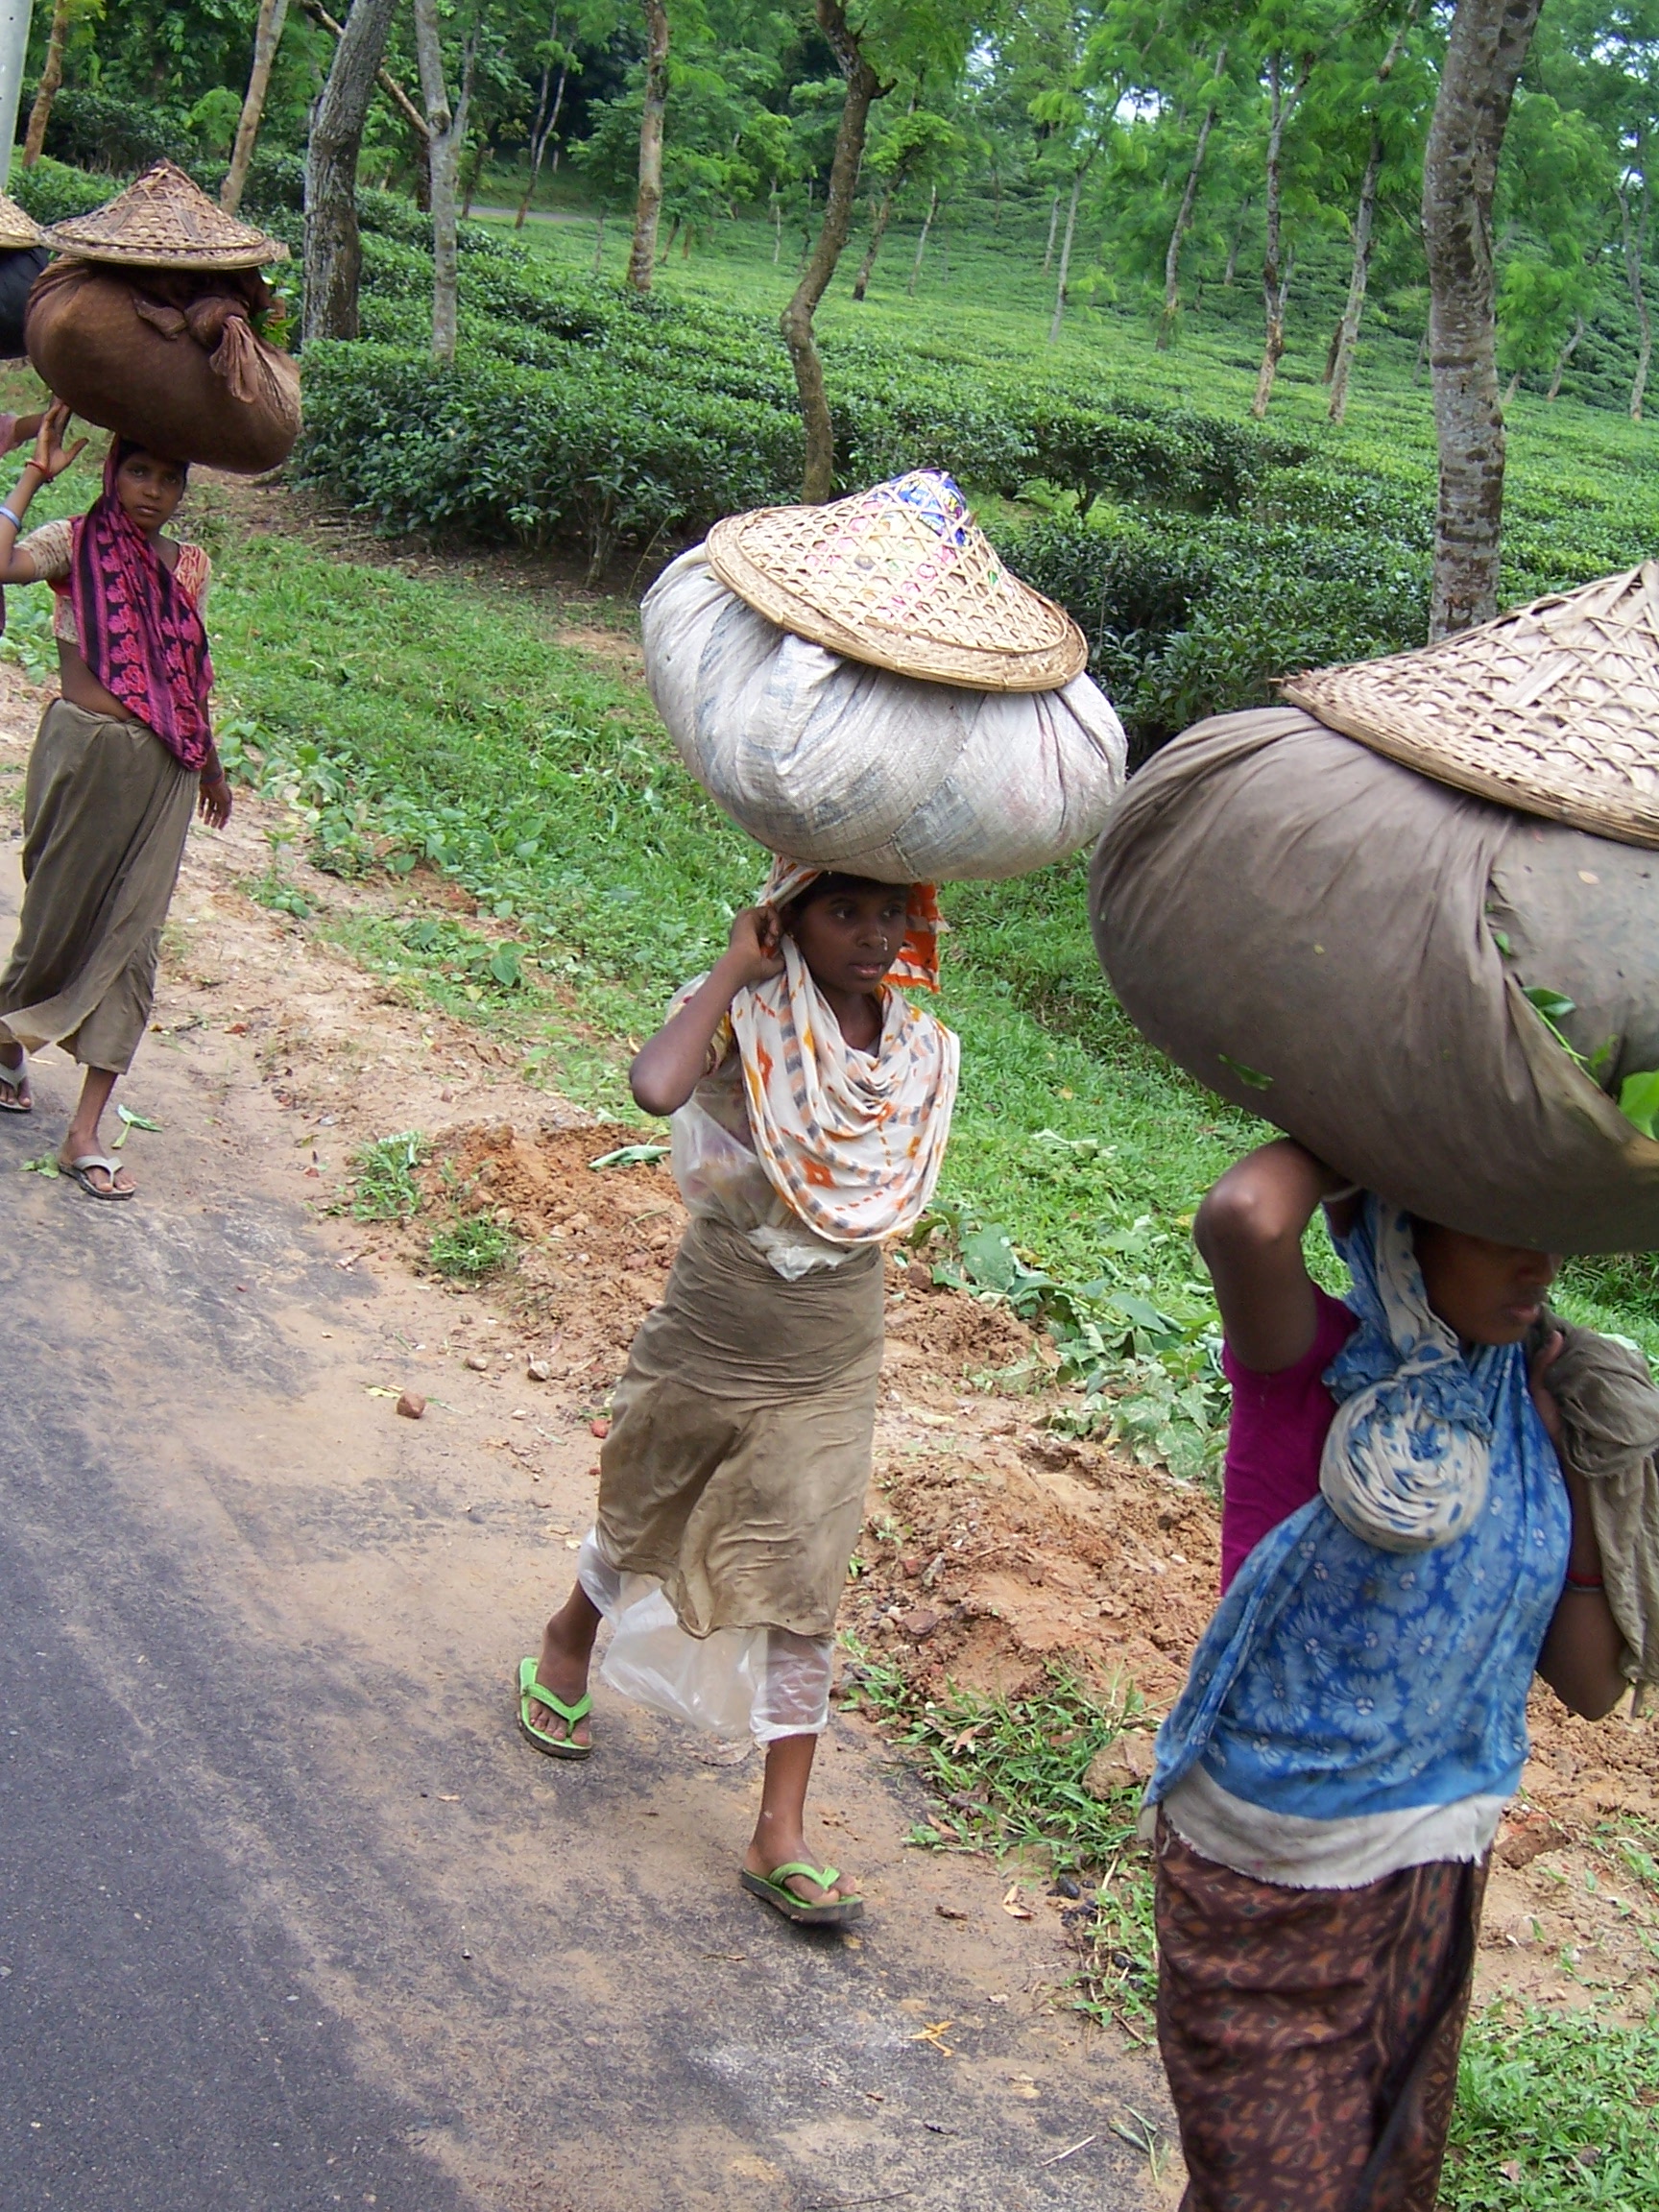 Woman carrying bags of tea leaves on their heads